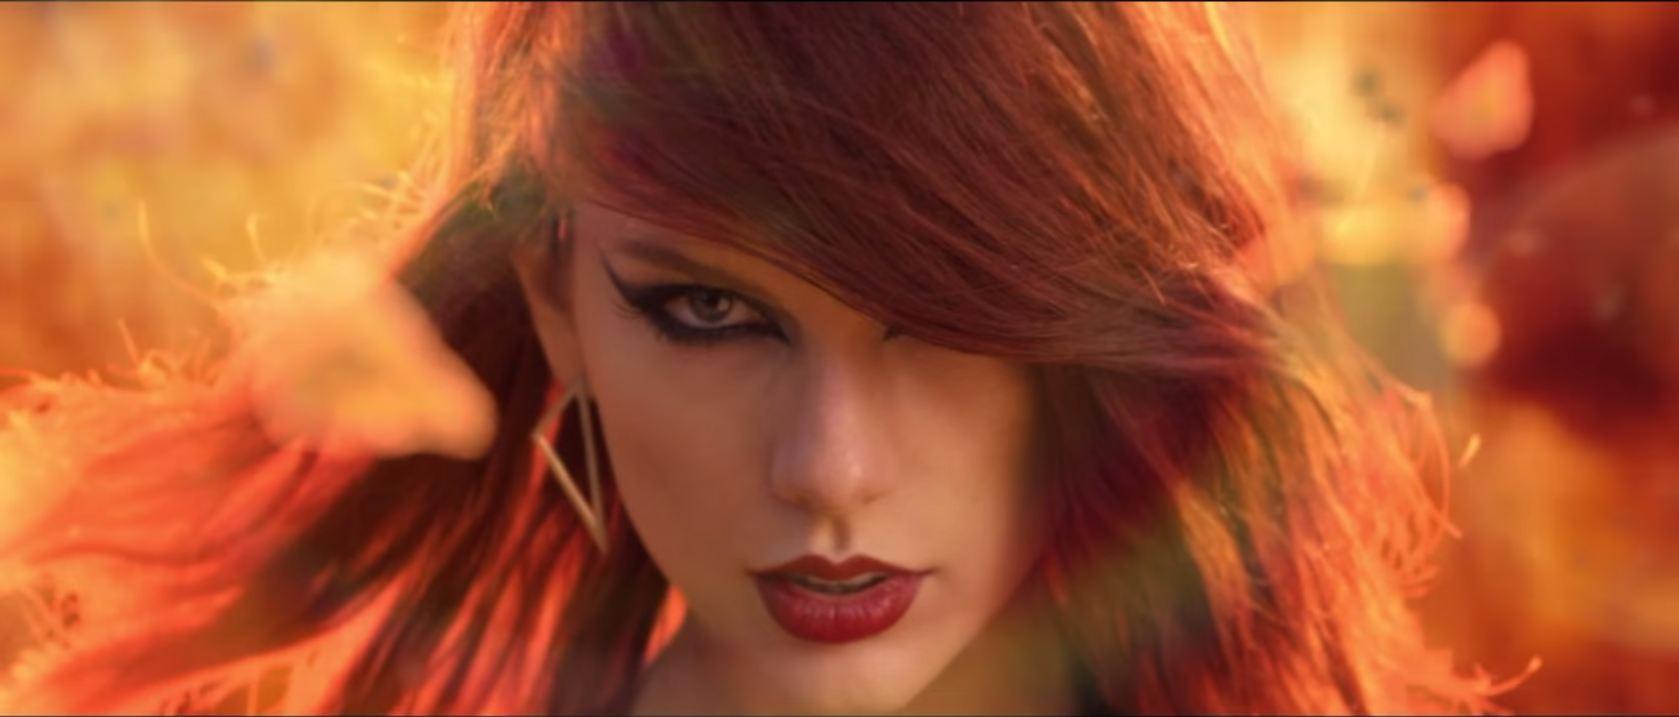 Taylor Swift is freaking gorgeous as a redhead <3